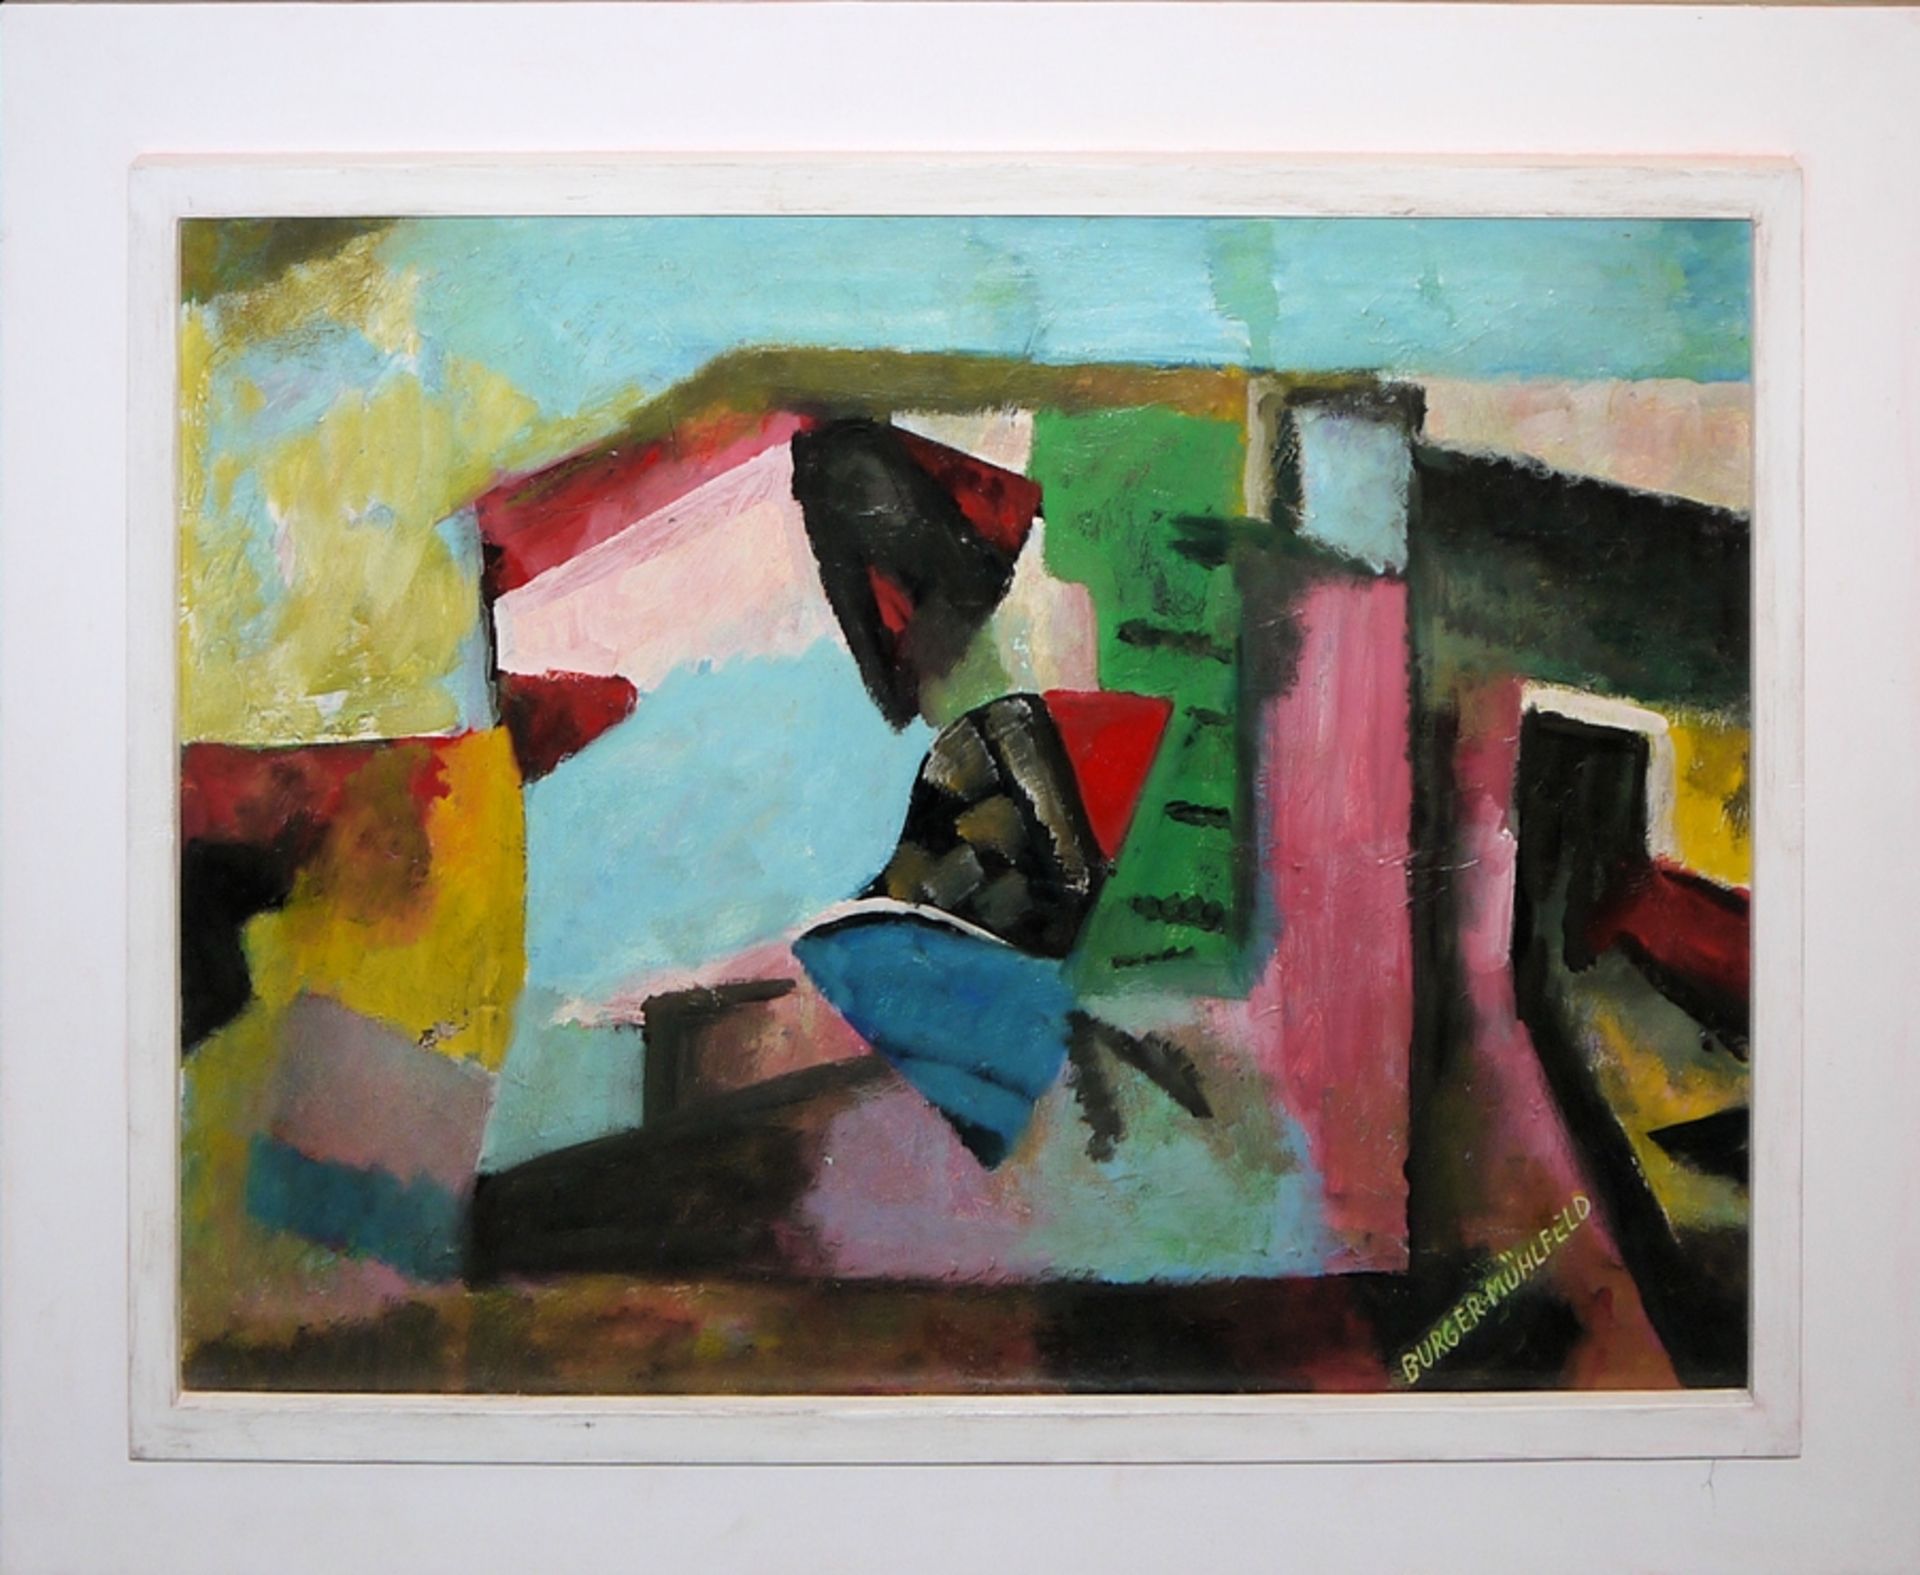 Fritz Burger-Mühlfeld, Large Abstraction, oil painting c. 1940/50, framed